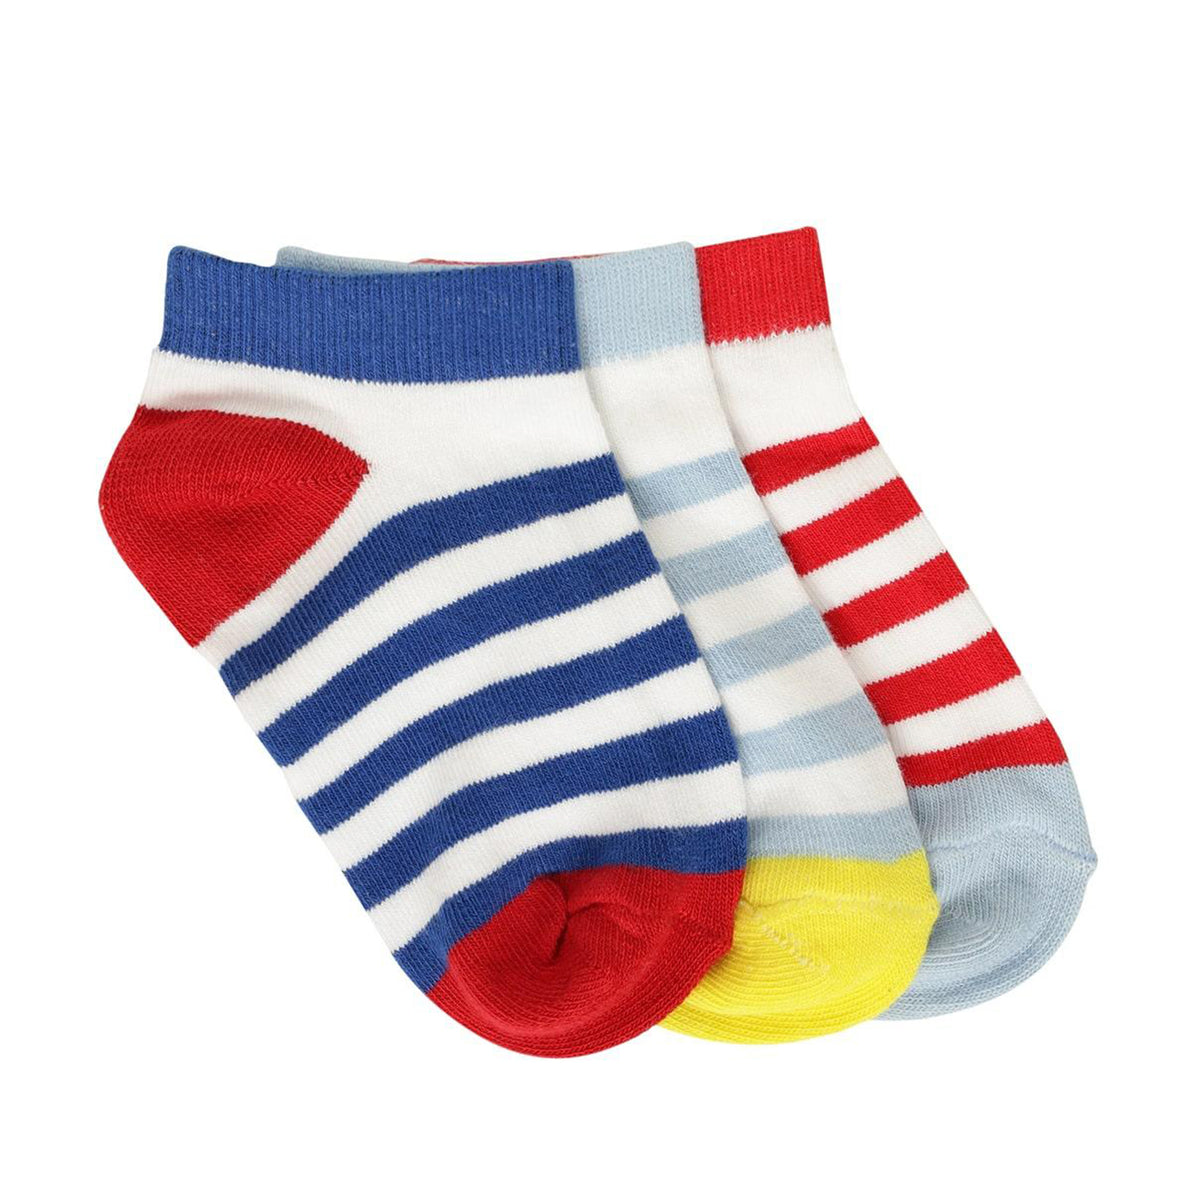 FOOTPRINTS Baby's Organic Colourful Stripes Cotton Socks (12-30 Months) -Pack of 3 Pairs